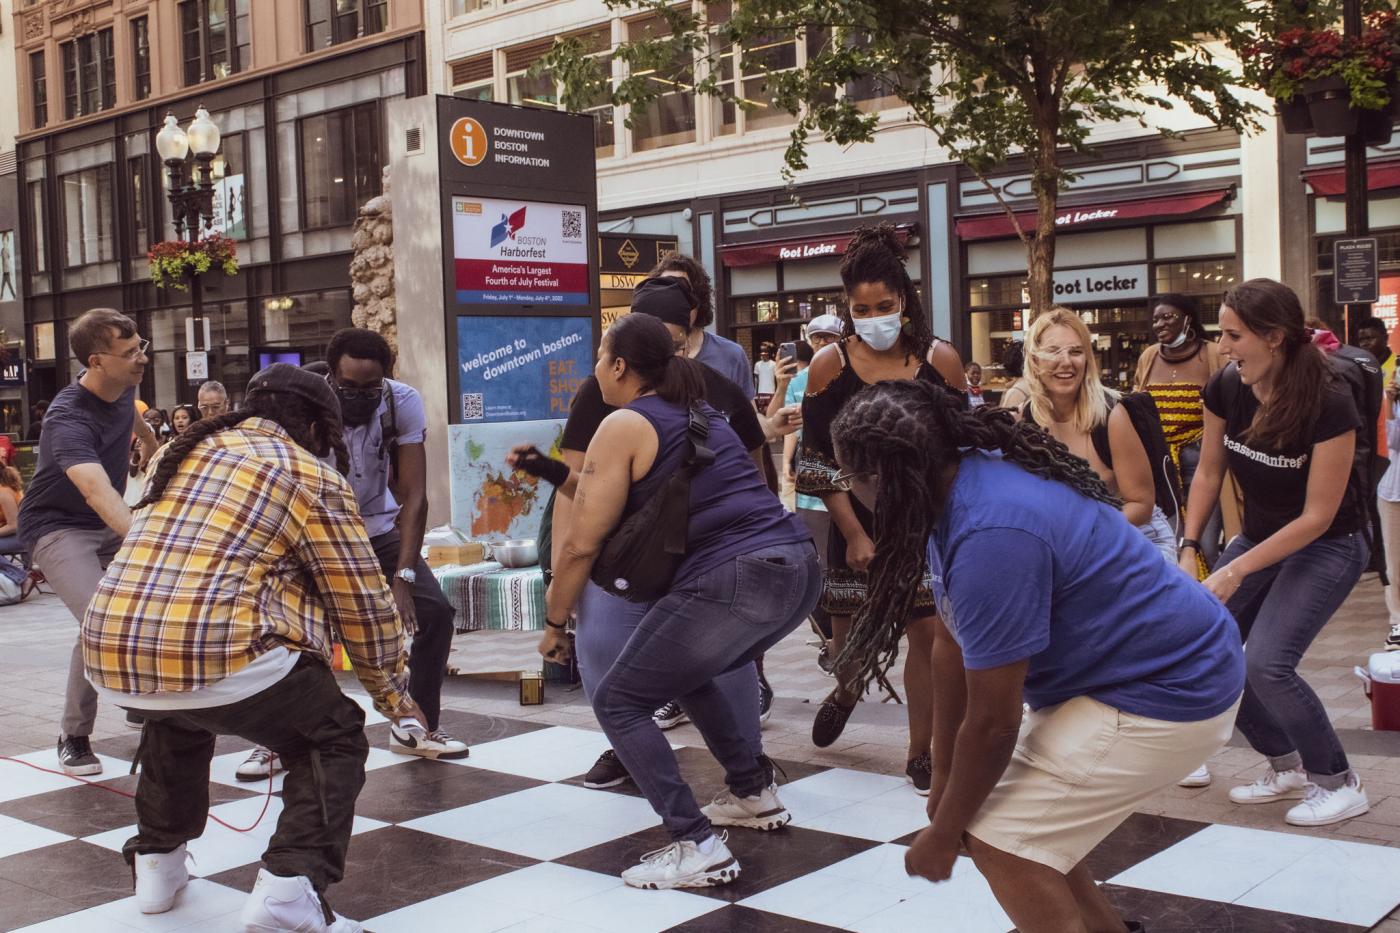 On a checkerboard ground, a group of folks of color dance. 